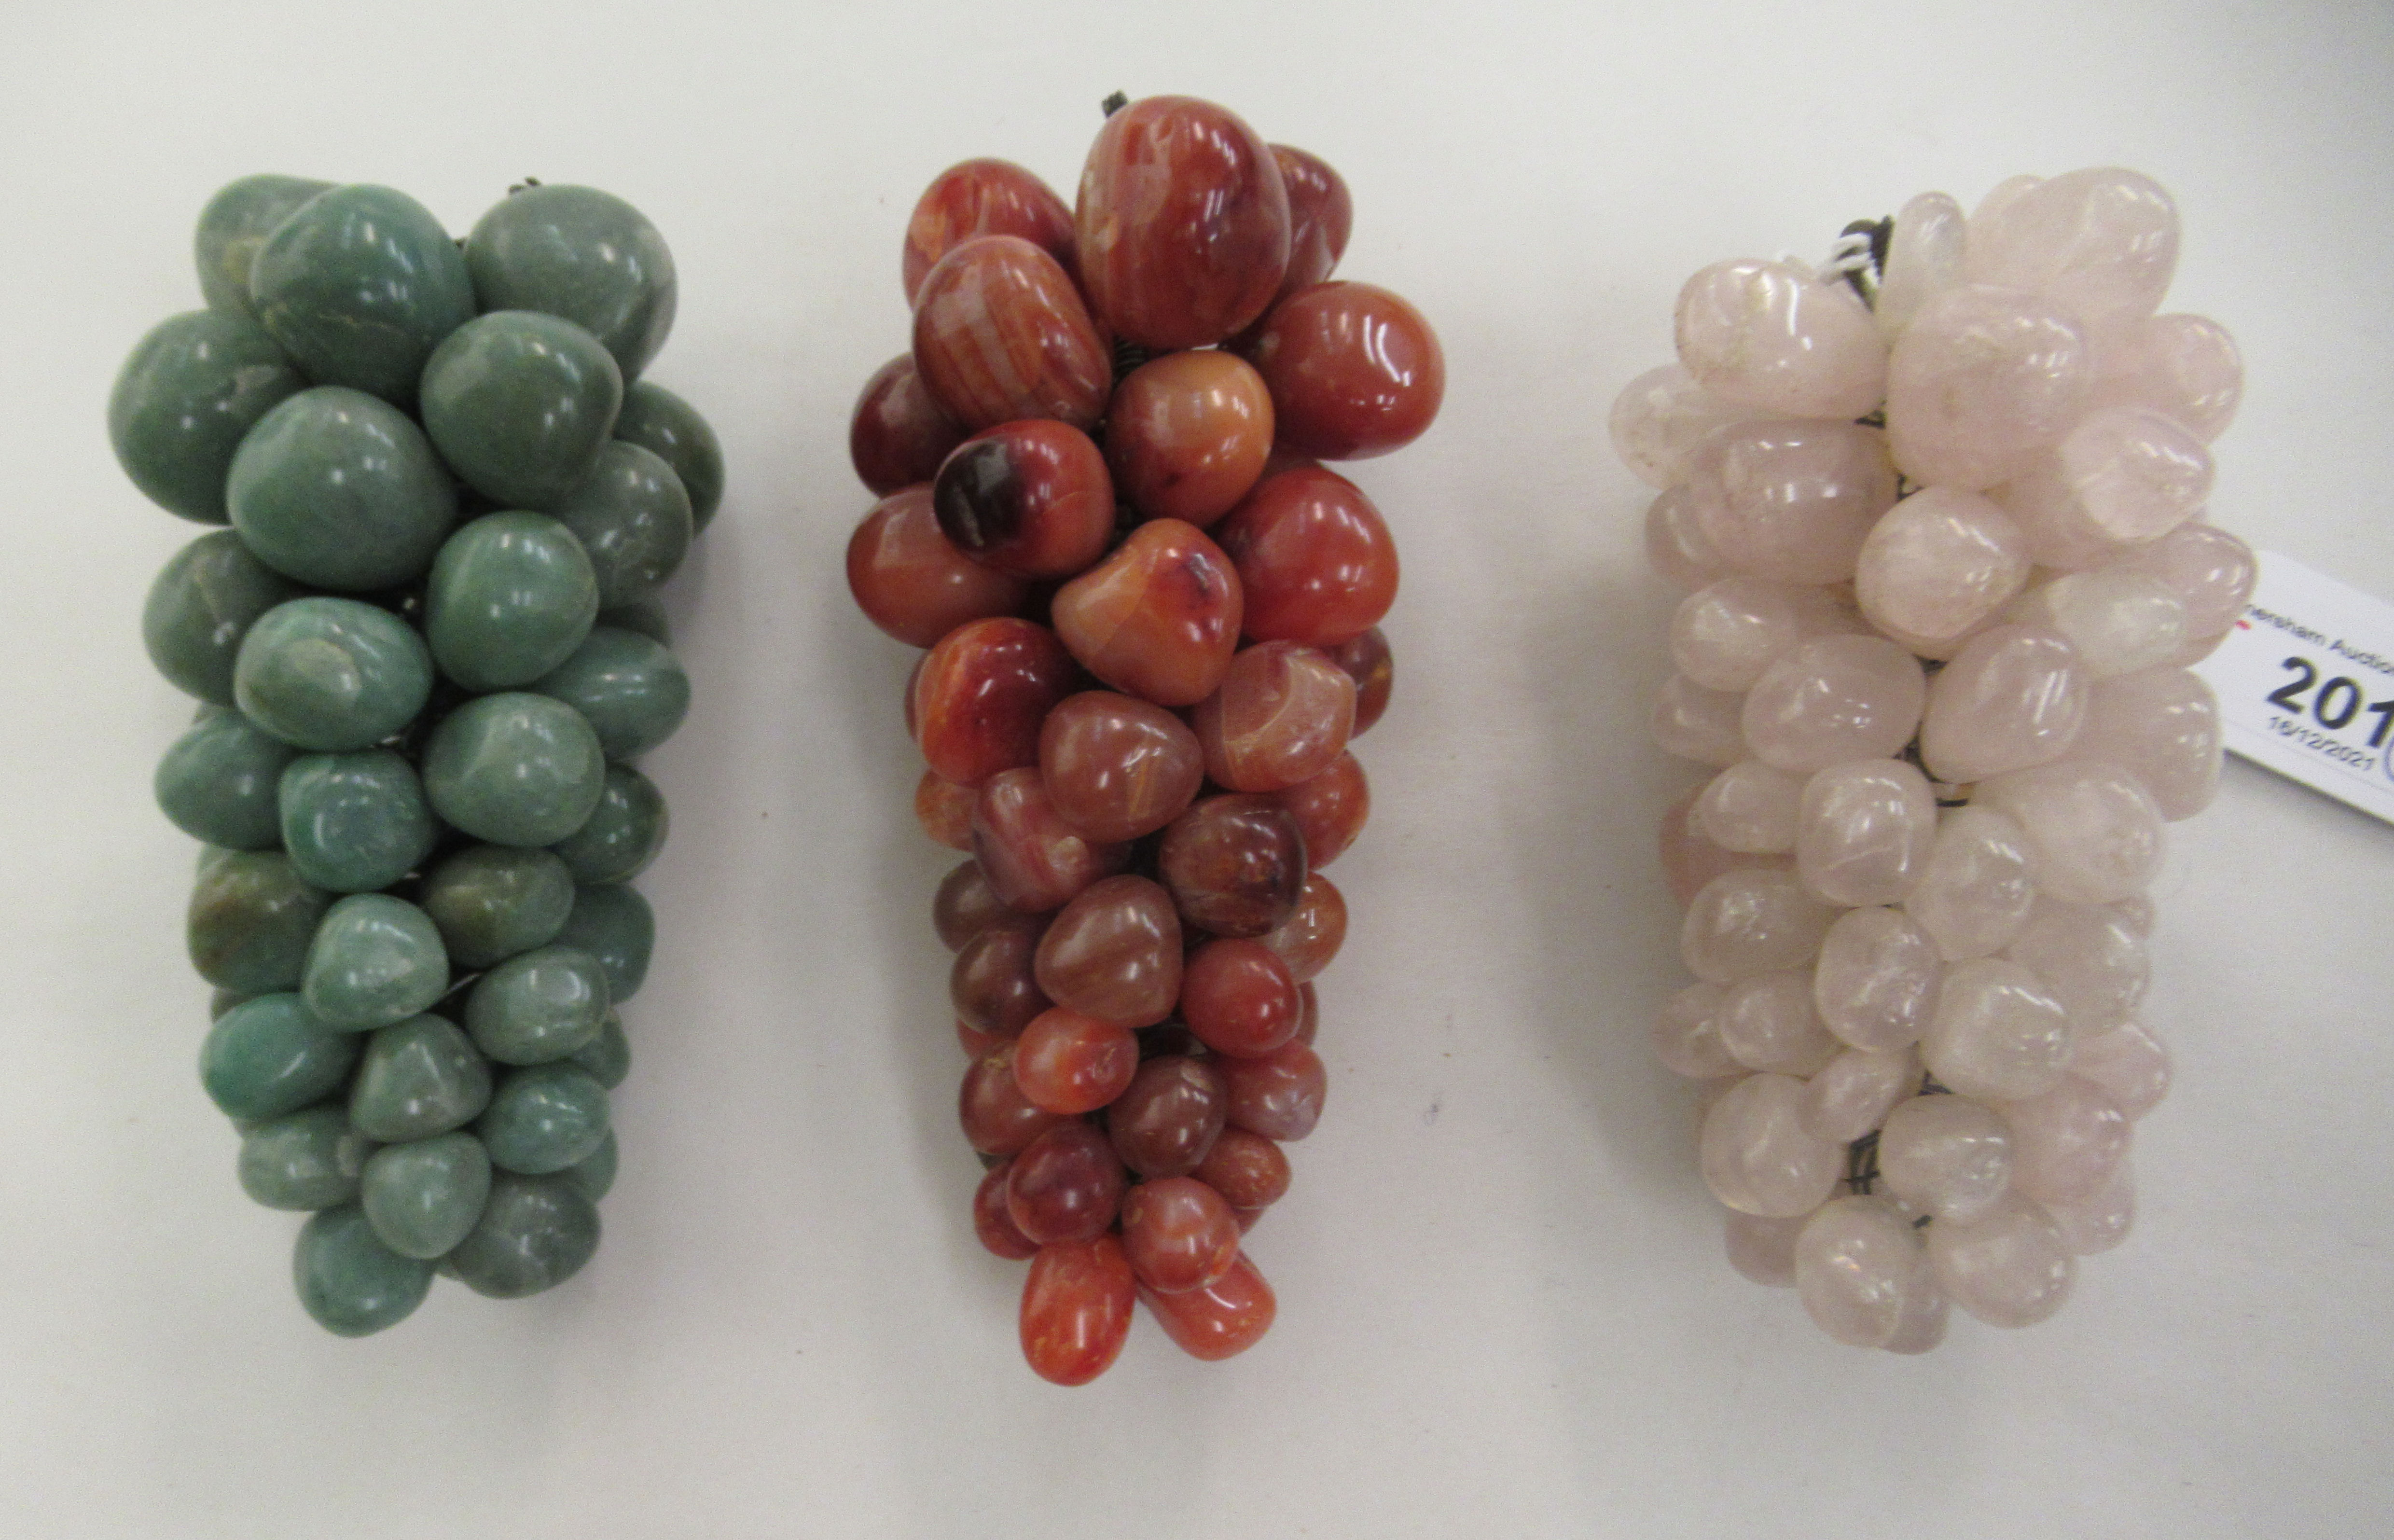 Three coloured hardstone ornaments, each fashioned as a bunch of grapes  6" - 8"h